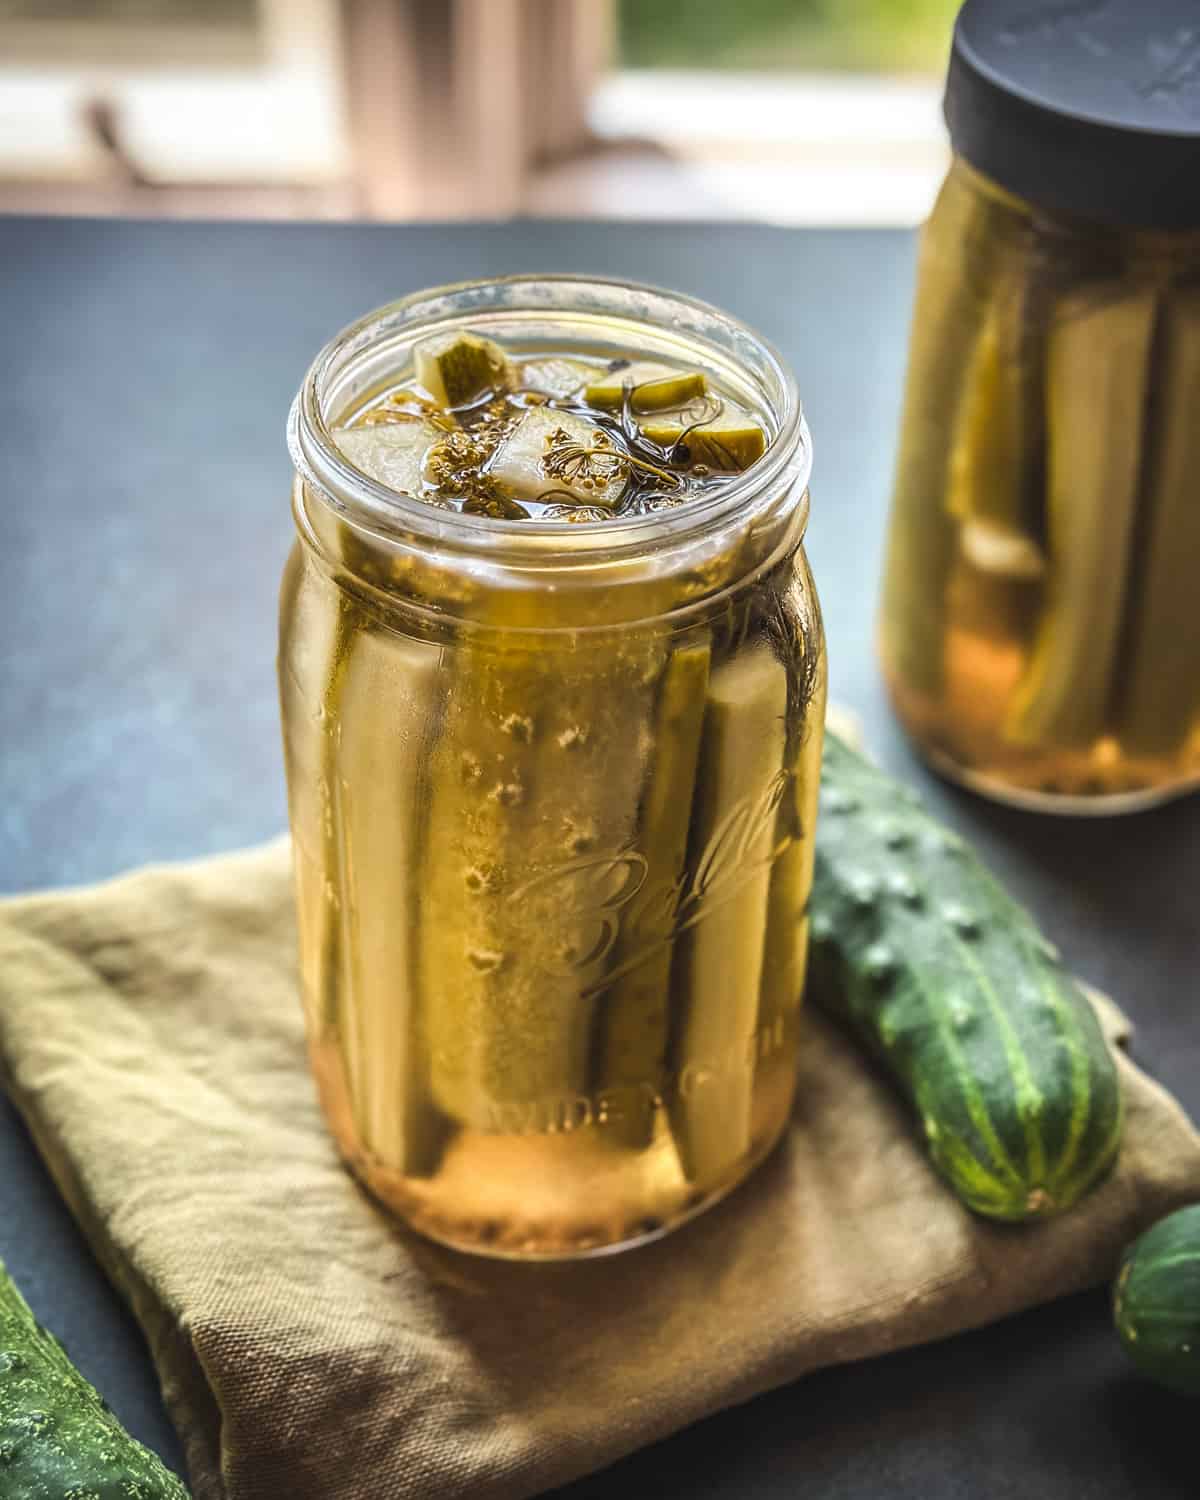 A jar of pickles on a natural cloth napkin, with fresh cucumbers surrounding.